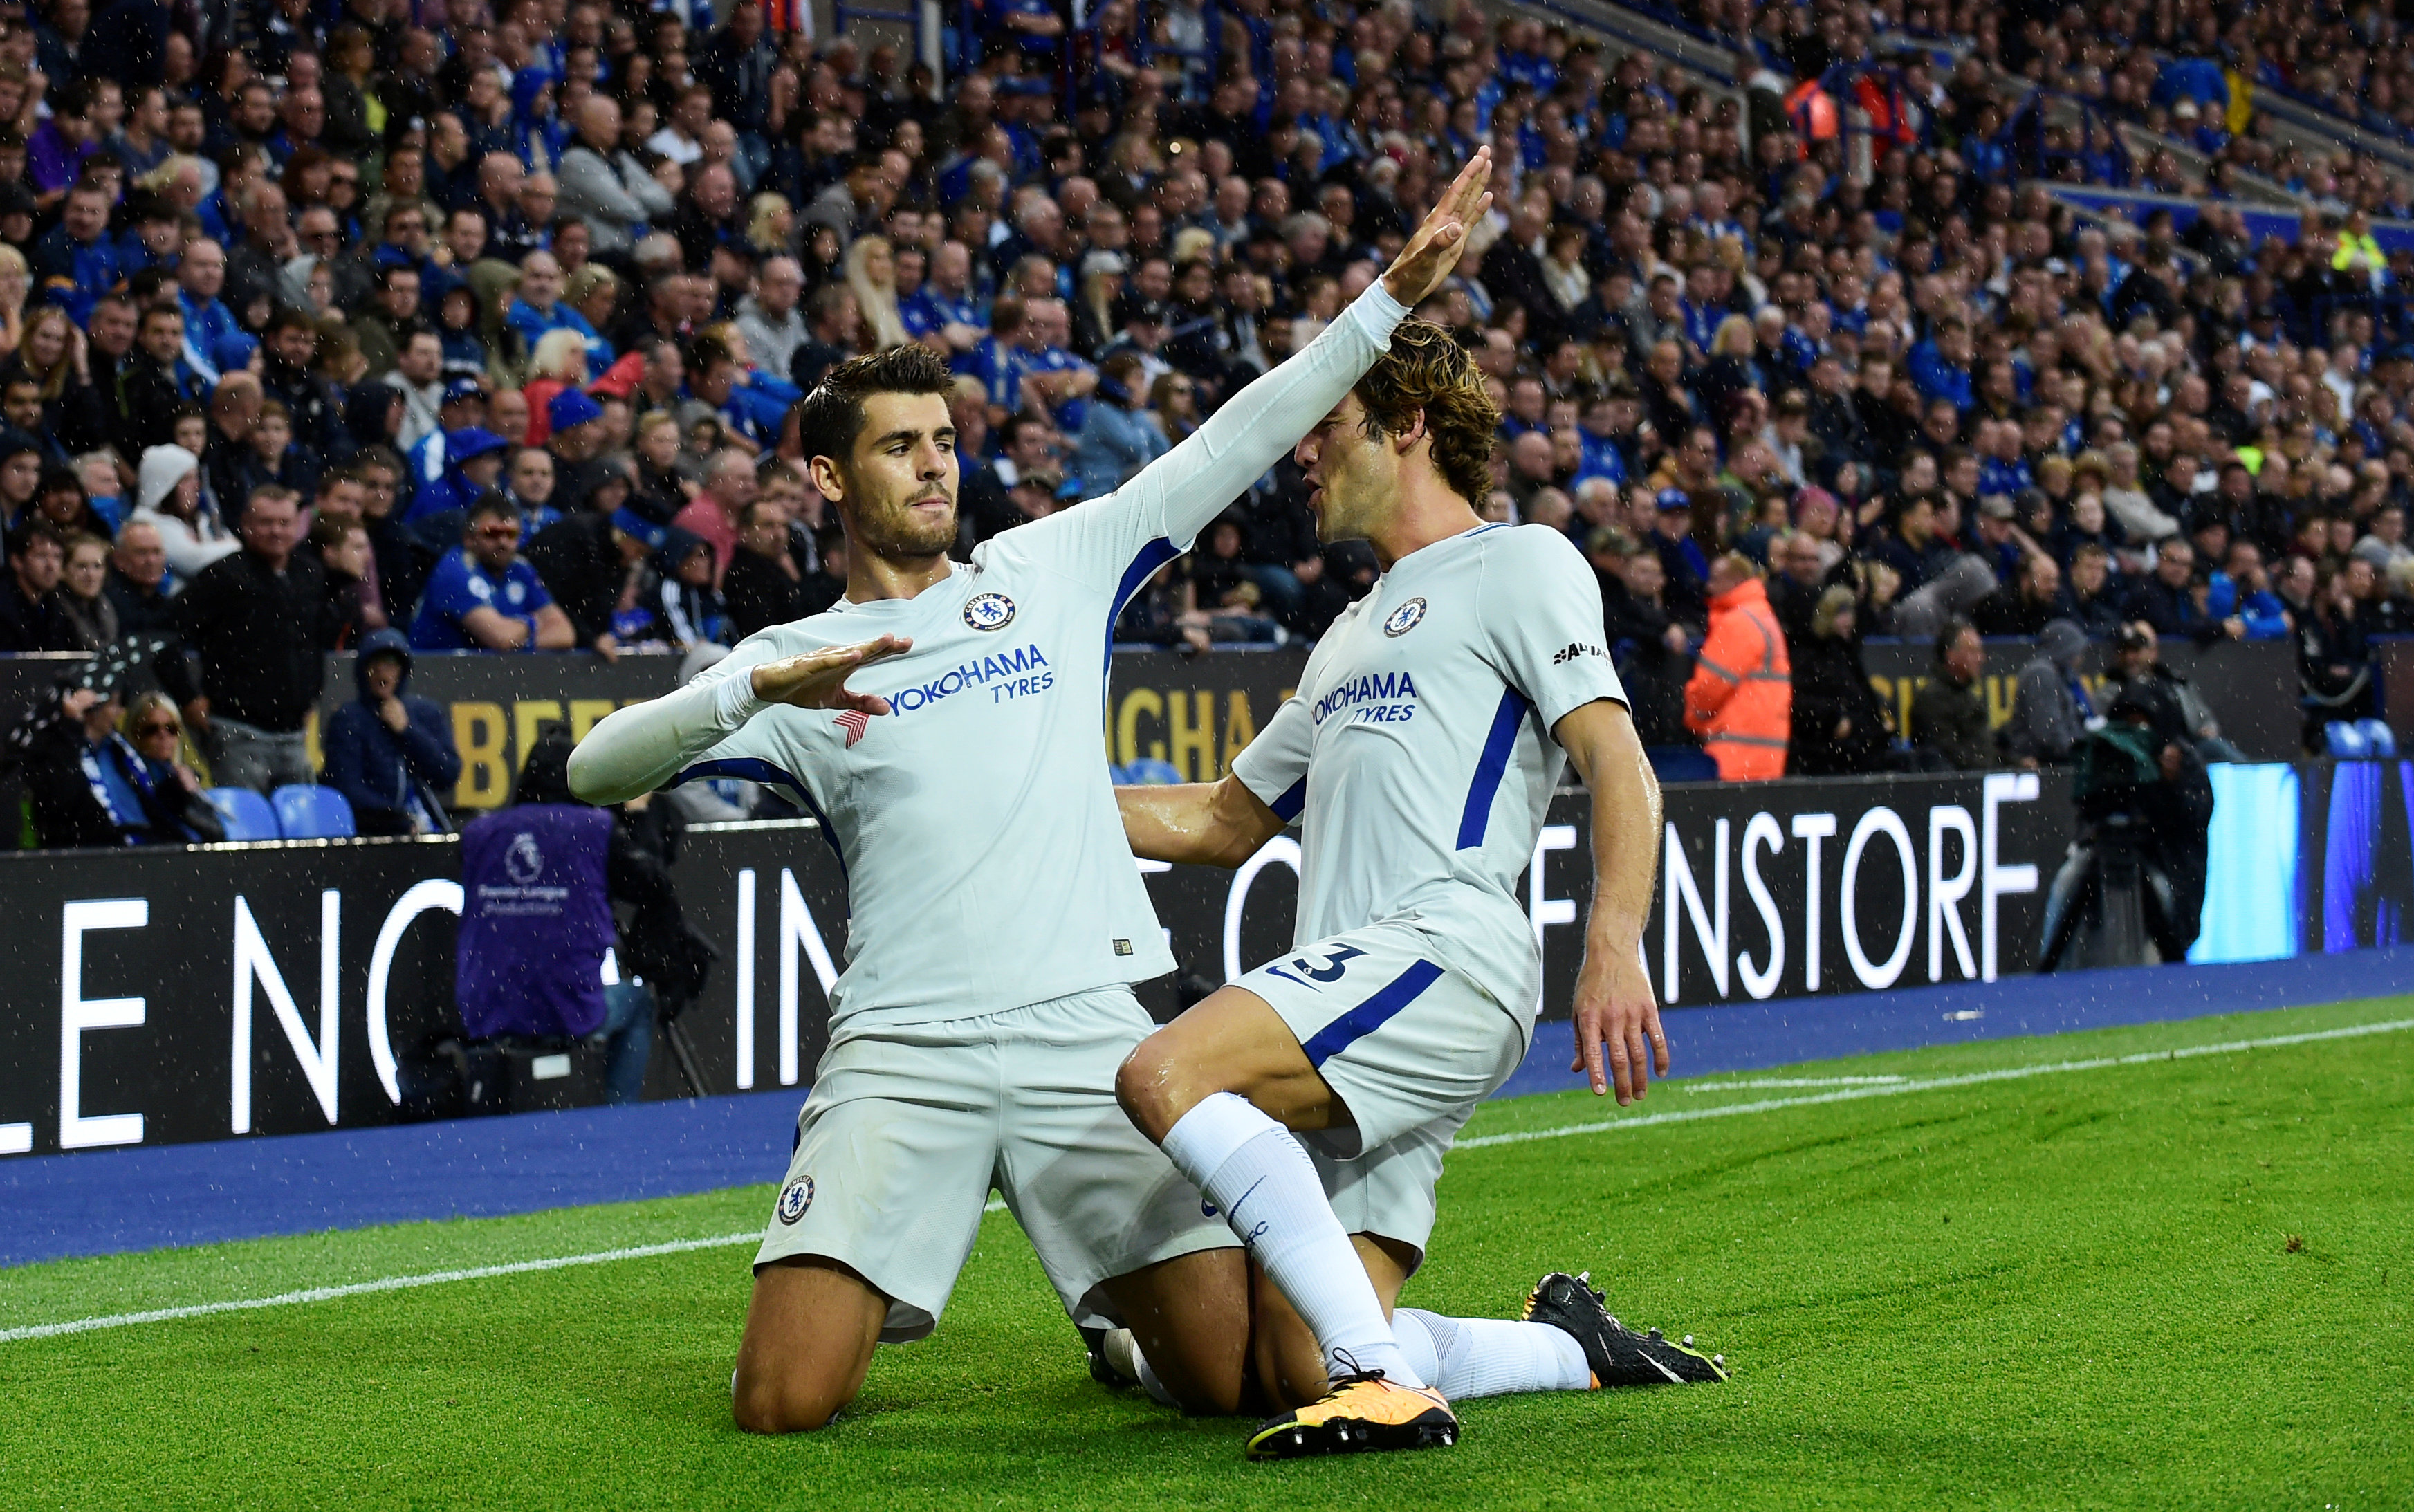 Football: Chelsea roll on with 2-1 win at Leicester City